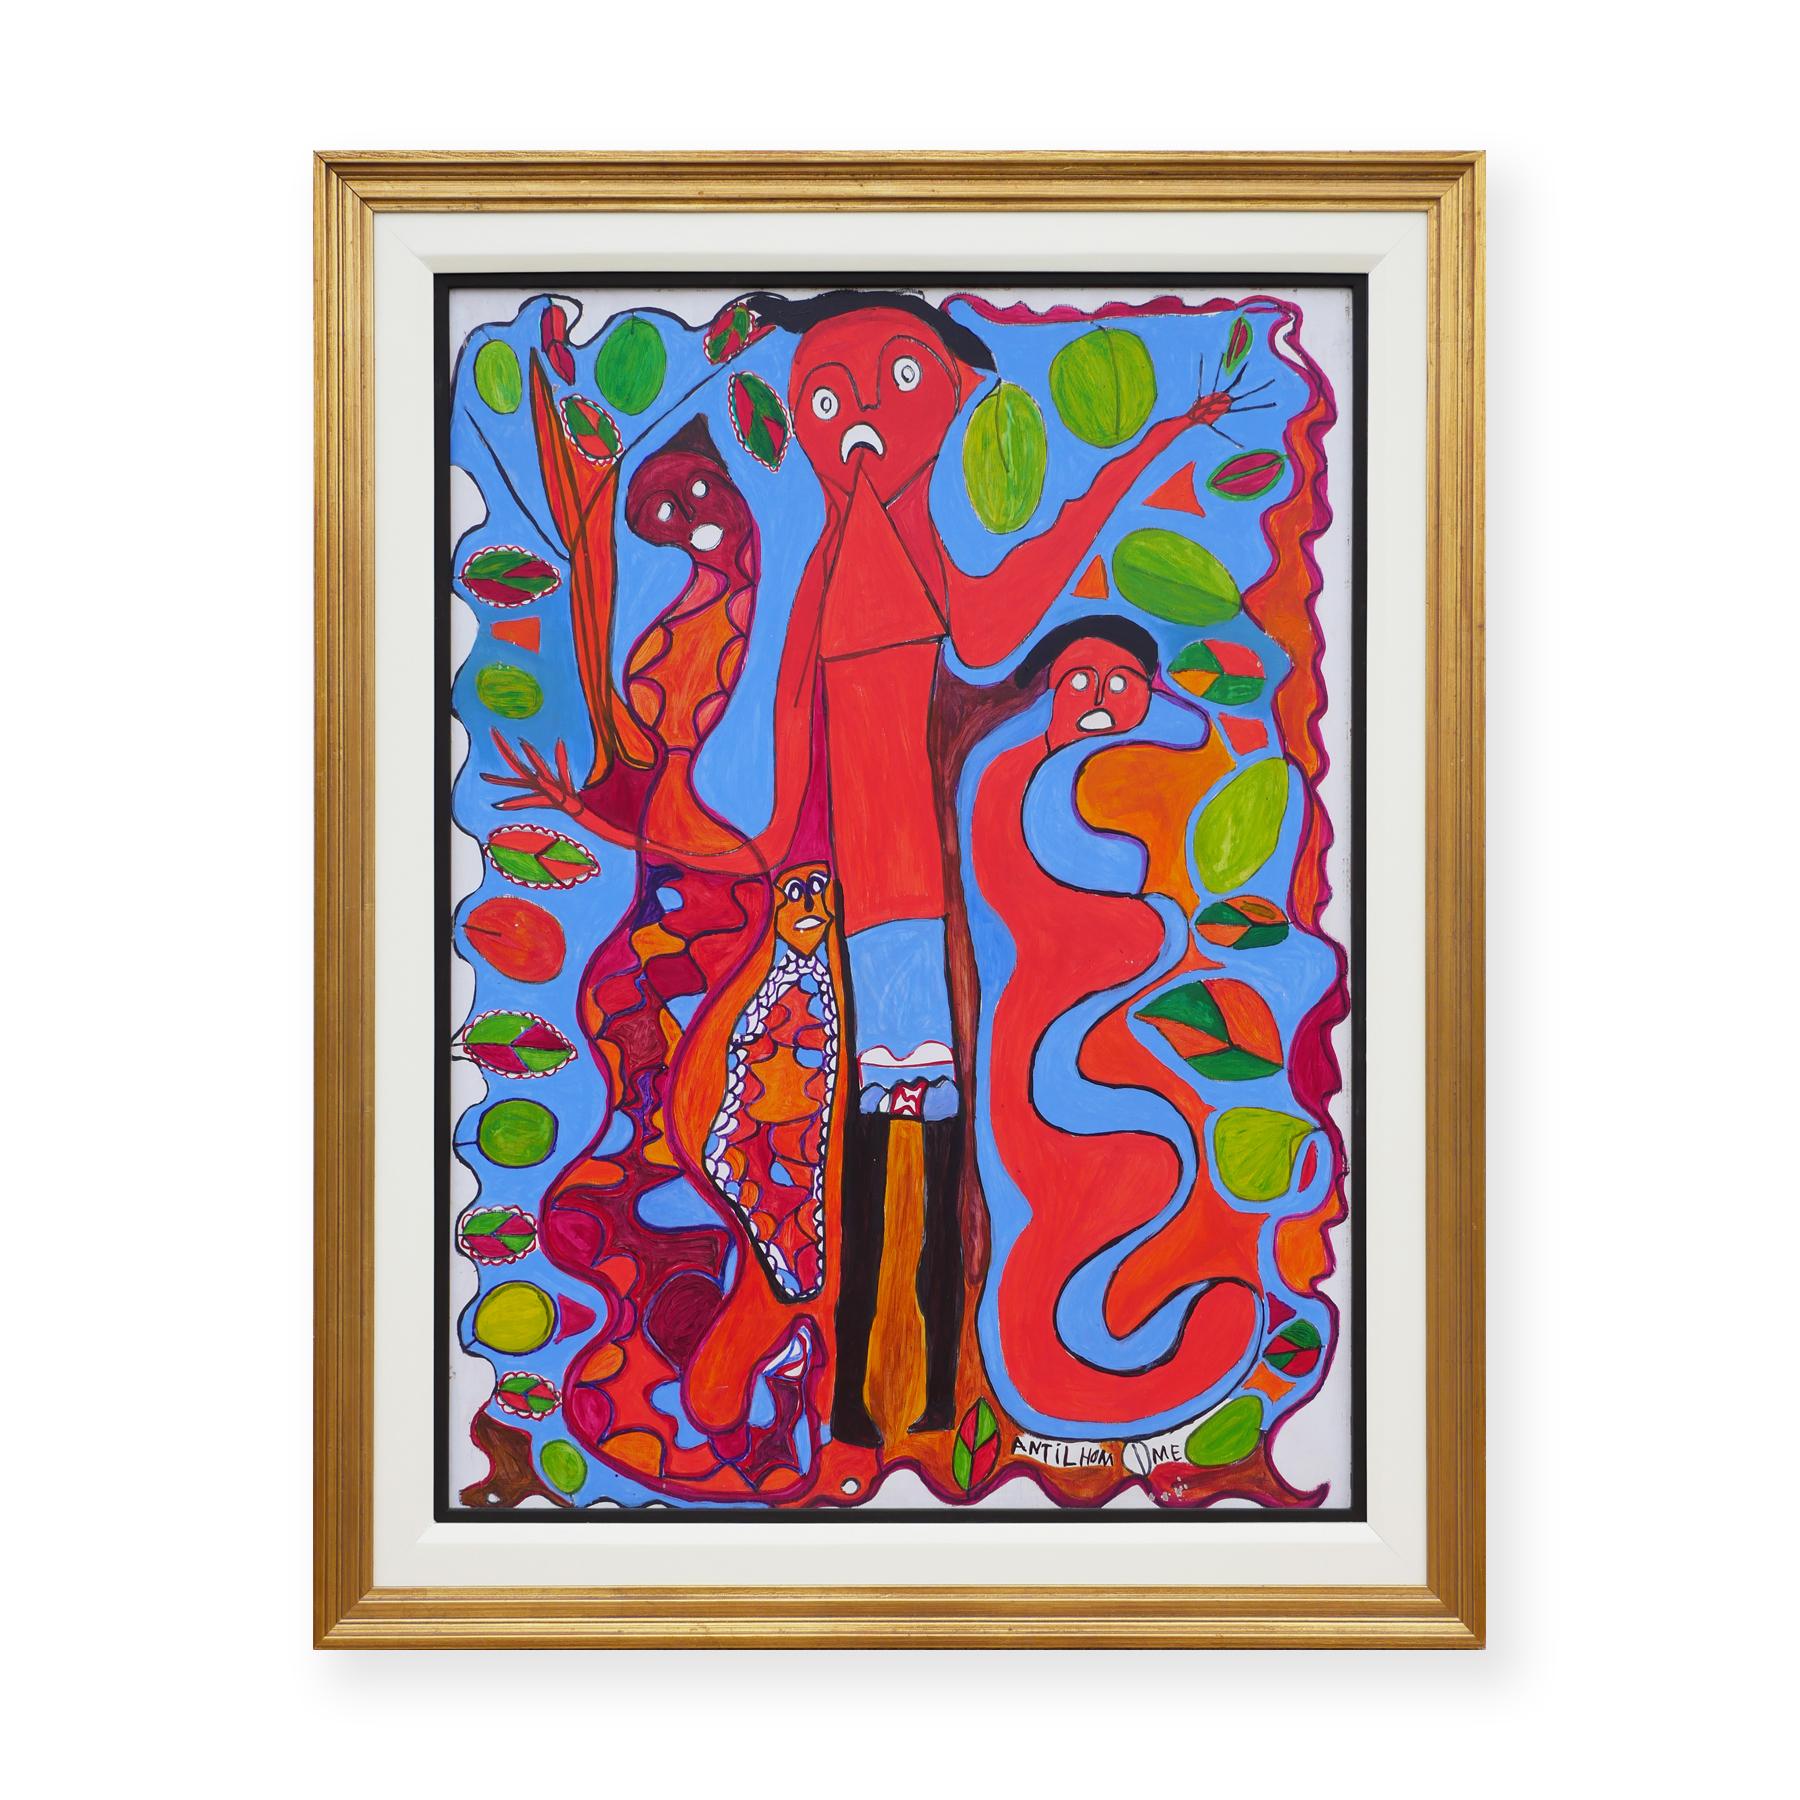 Red and blue abstract figurative painting by Haitian artist Richard Antilhomme. The painting depicts four different red flowy figures that branch from each other. The figures are against a light blue background with green botanical elements. Signed